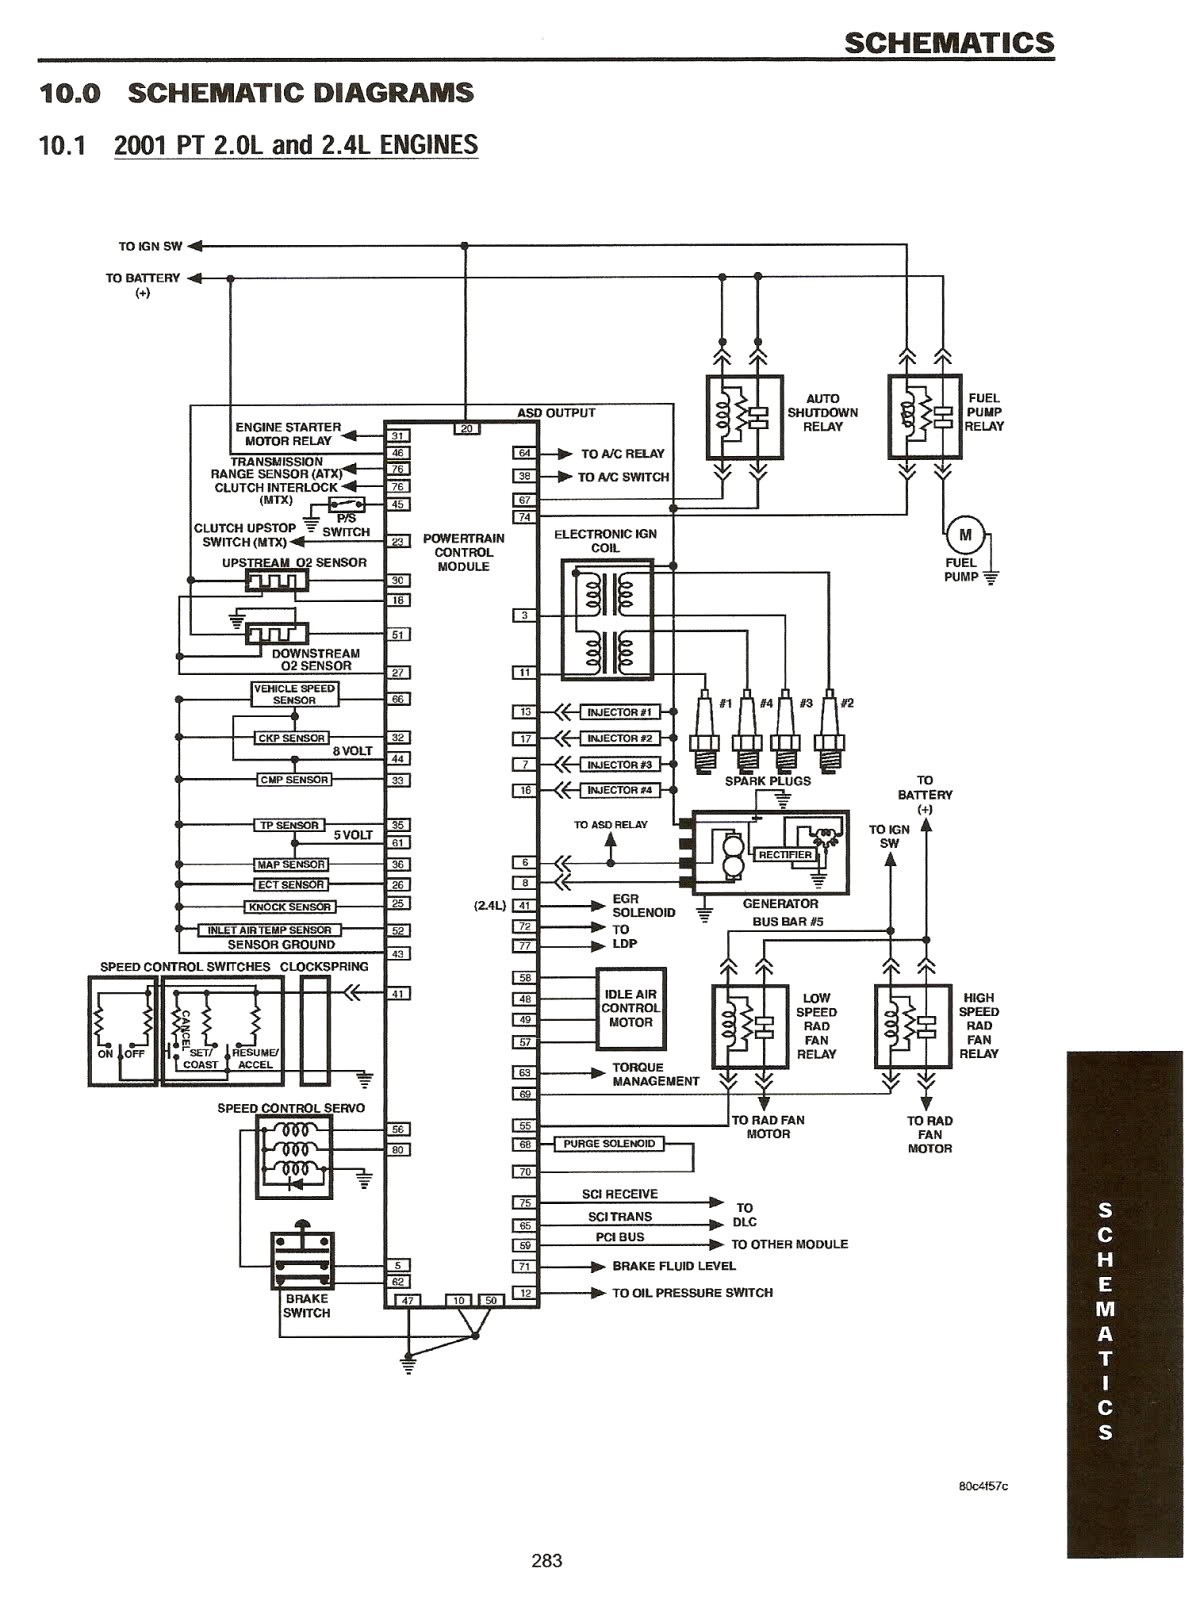 2004 Pt Cruiser Wiring Diagram Fitfathers Me Also All